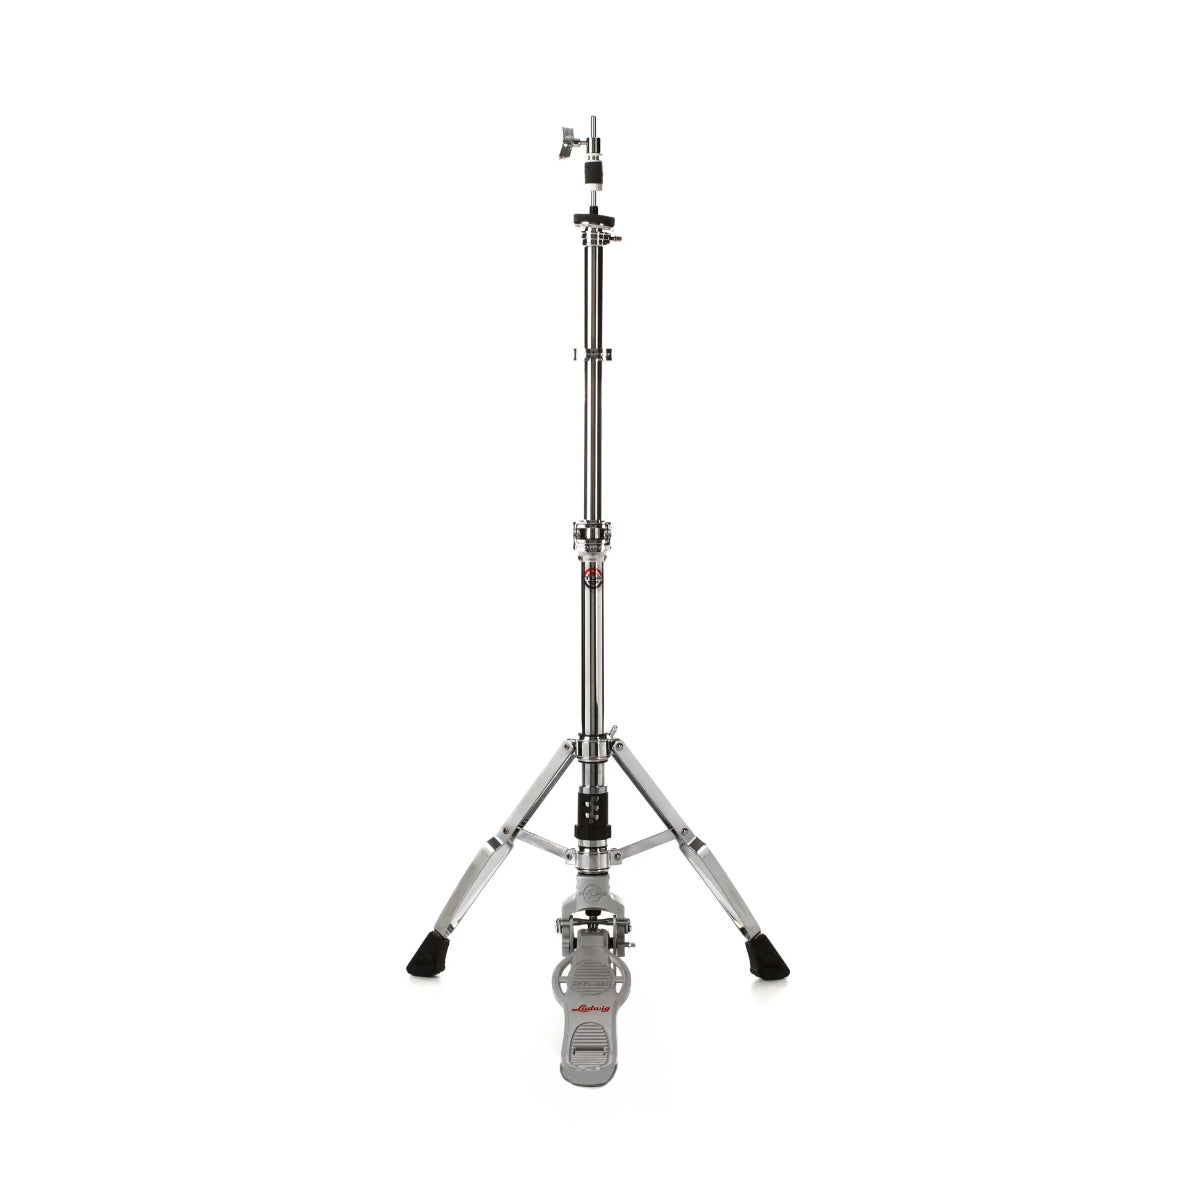 Ludwig LAP16HH Atlas Pro Double-Braced Legs Hi-Hat Stand with Rotatable Base & Adjustable Footboard Angle for Percussion Instruments